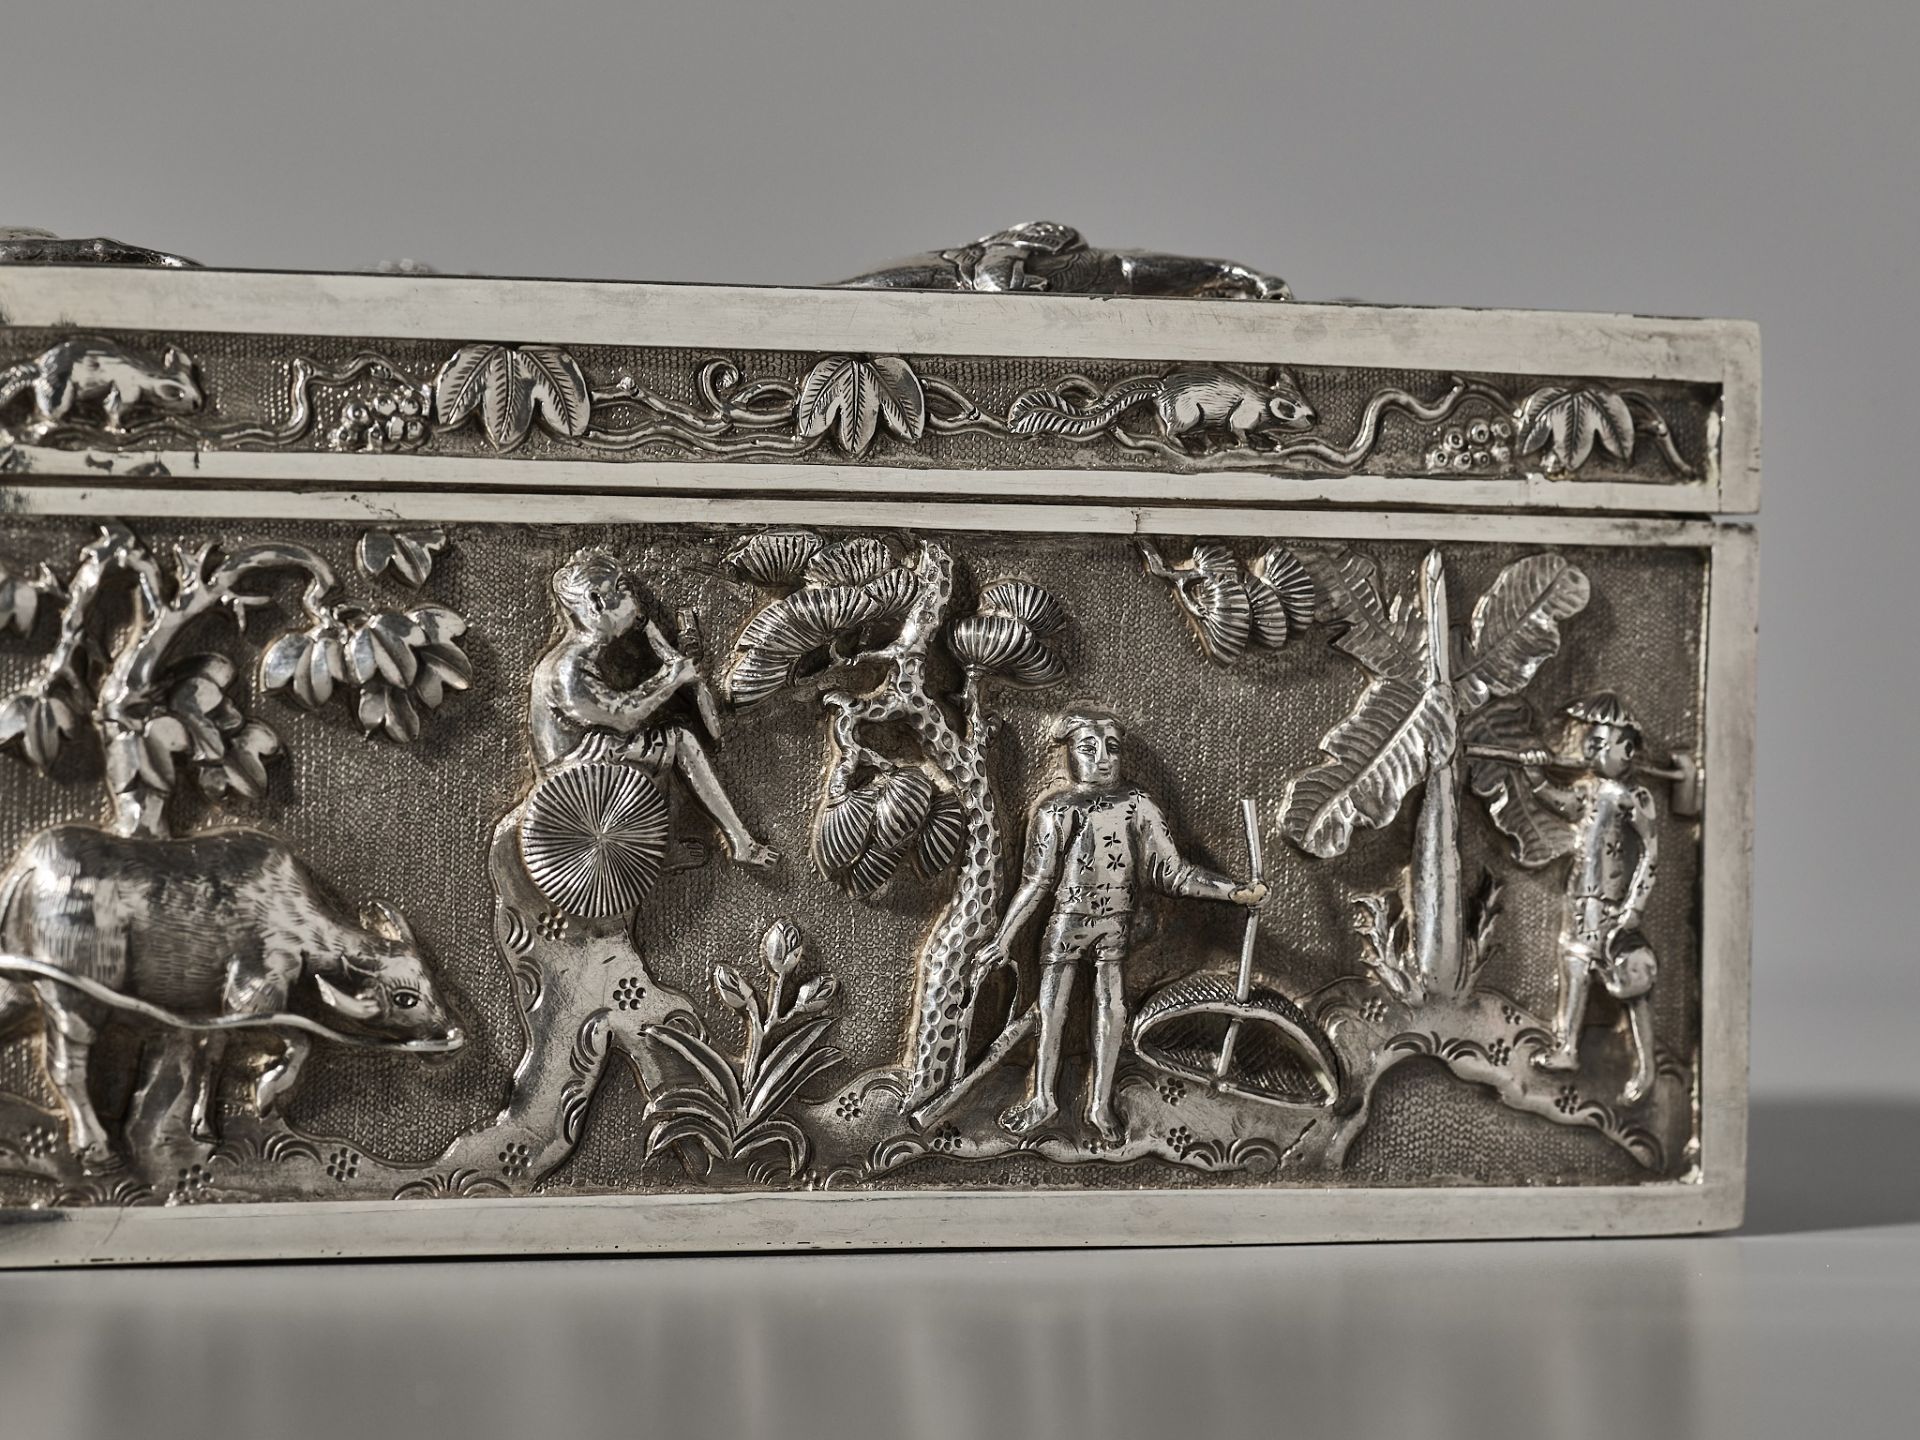 AN EXPORT SILVER REPOUSSE CIGAR BOX AND COVER, TONG YI MARK, LATE QING DYNASTY - Image 20 of 22